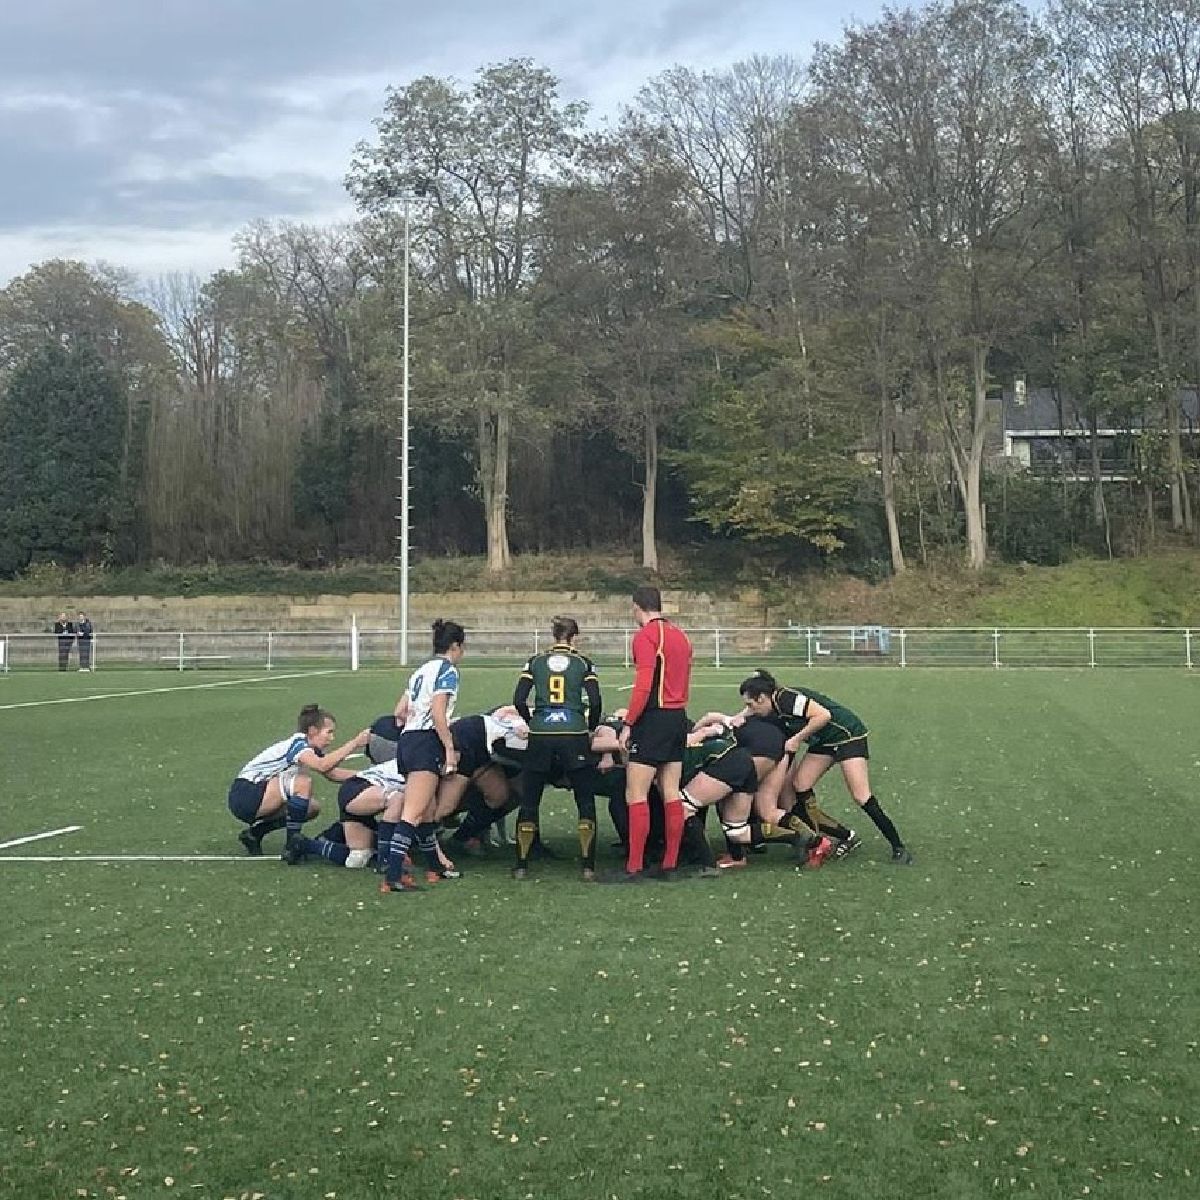 Congratulations Rugby Club Leuven on your big win!